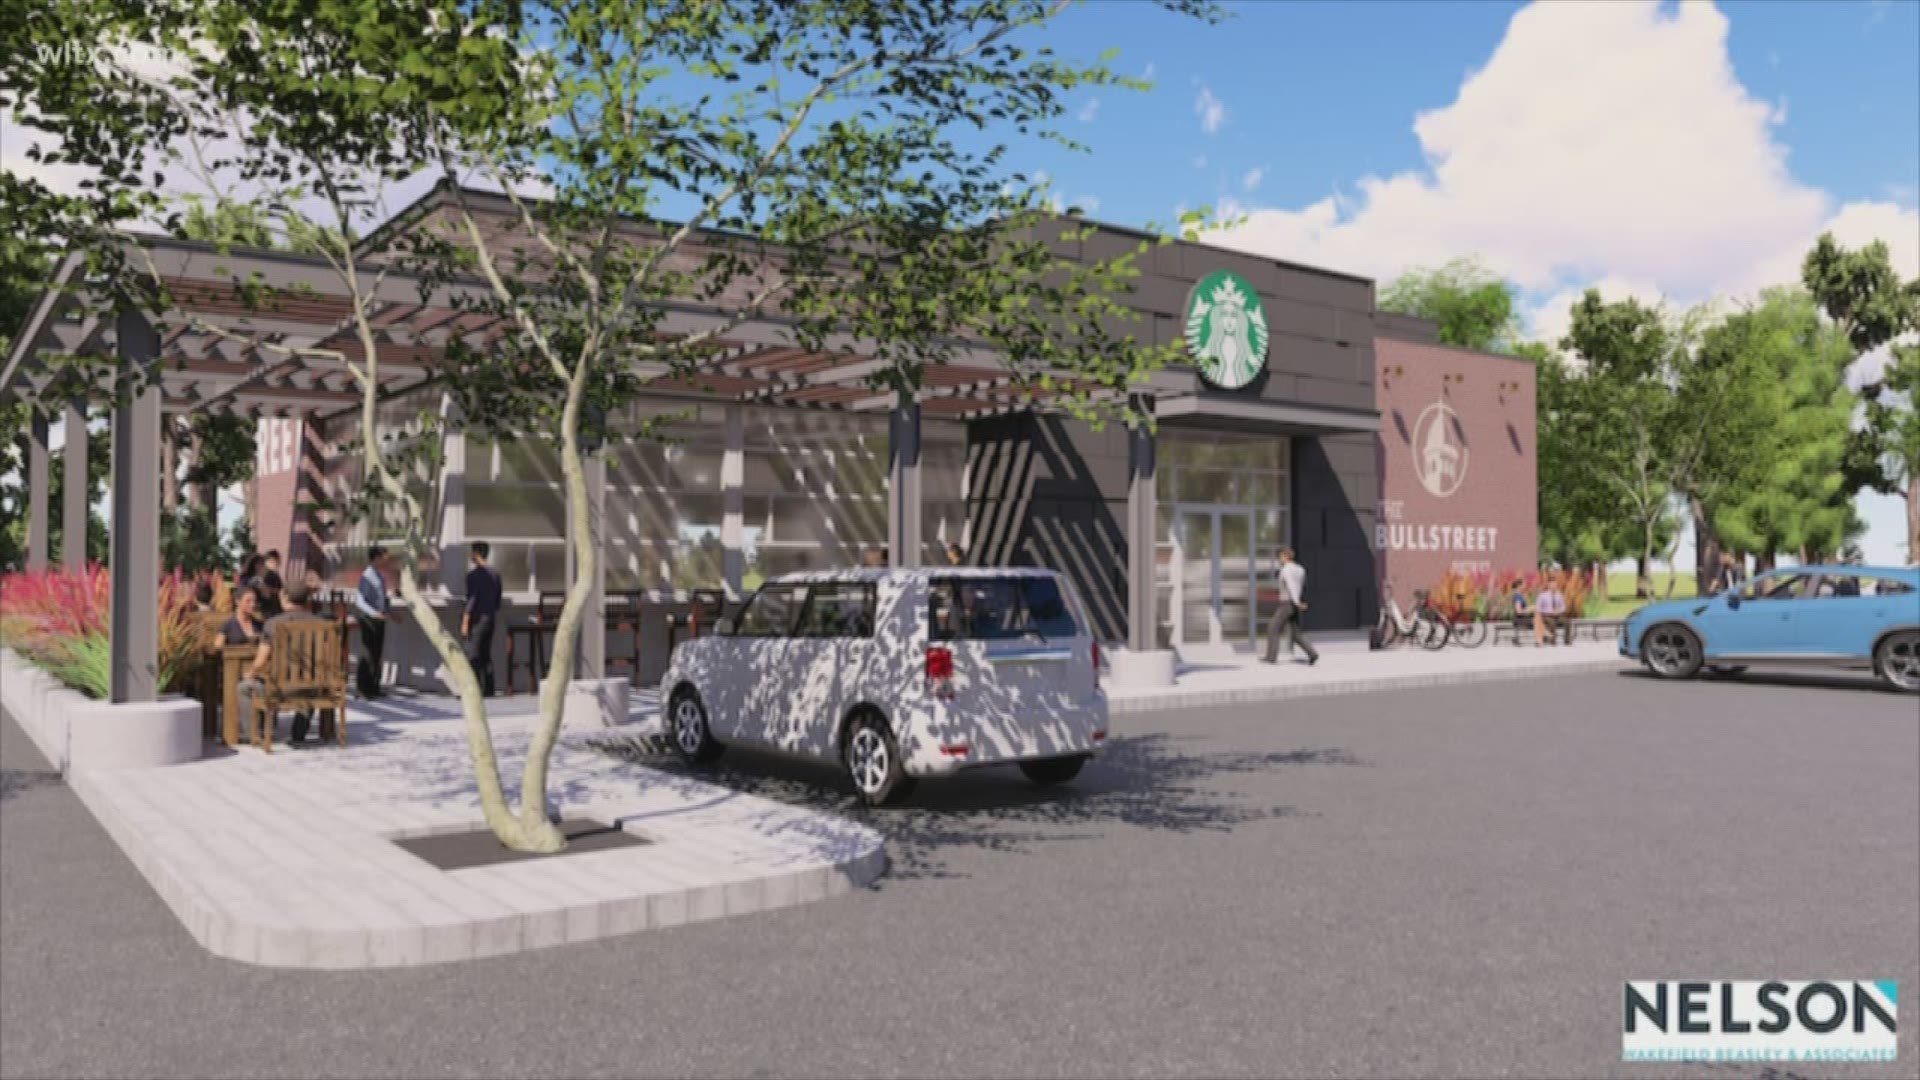 The Starbucks will be a 2,500 sq. ft. stand-alone building with a drive-through and outdoor seating